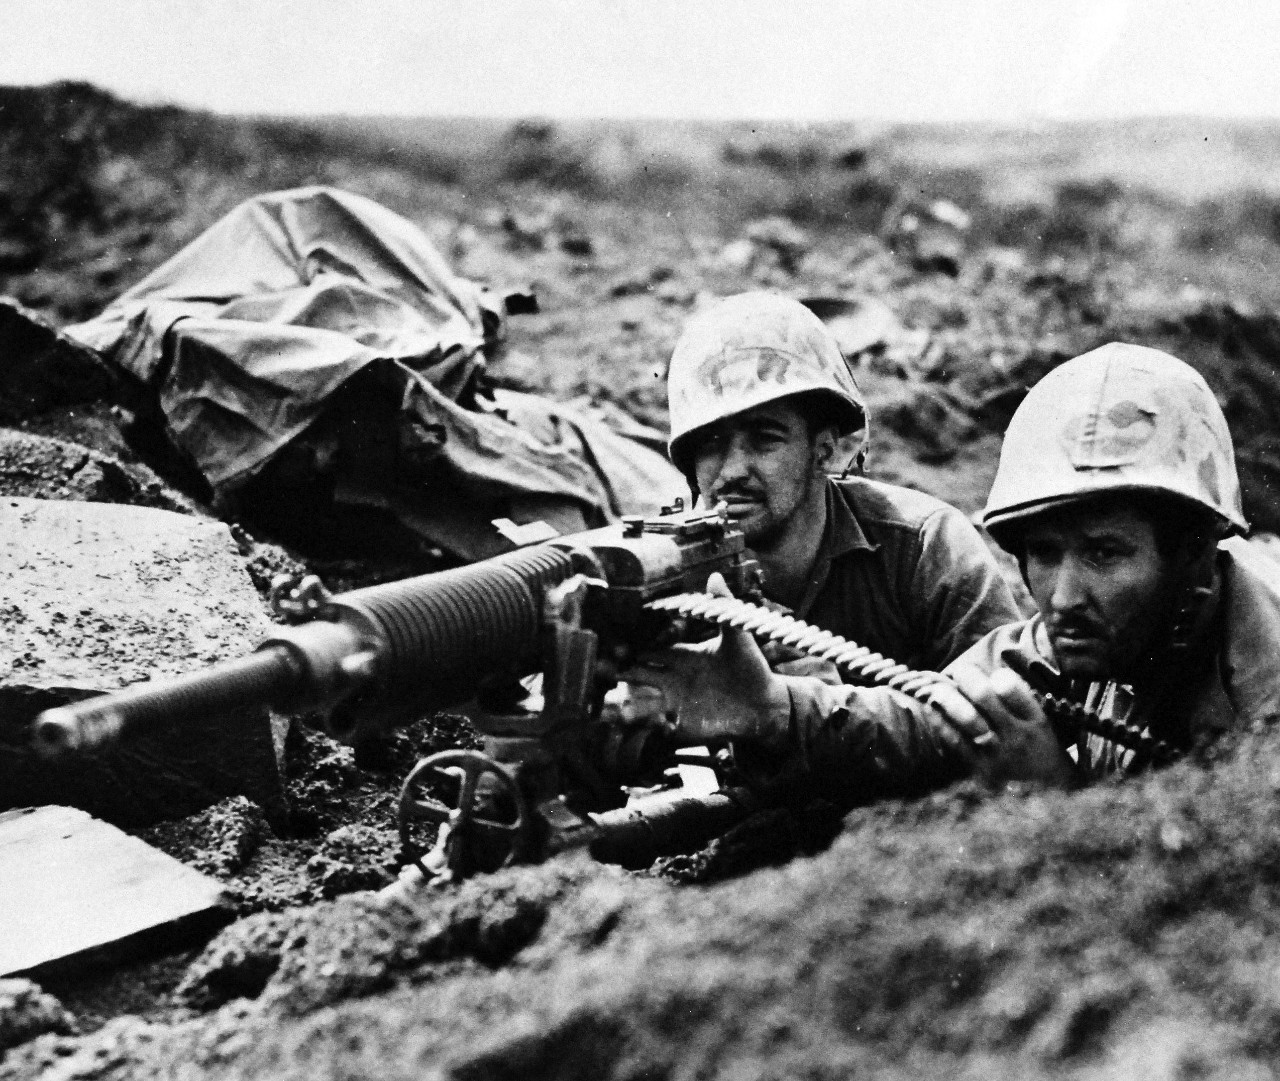 80-G-304847:  Battle for Iwo Jima, February-March 1945.  After their own gun was knocked out on Iwo Jima, Marines of the Fifth Division took over this captured Hotchkiss machine gun and gave the enemy back some of its down lead.  Shown, (left to right):  Corporal A.R. Cassavant and Corporal Thomas McLennon.   Photograph released February 25, 1945.  Official U.S. Navy Photograph now in the collections of the National Archives.  (2016/01/19).